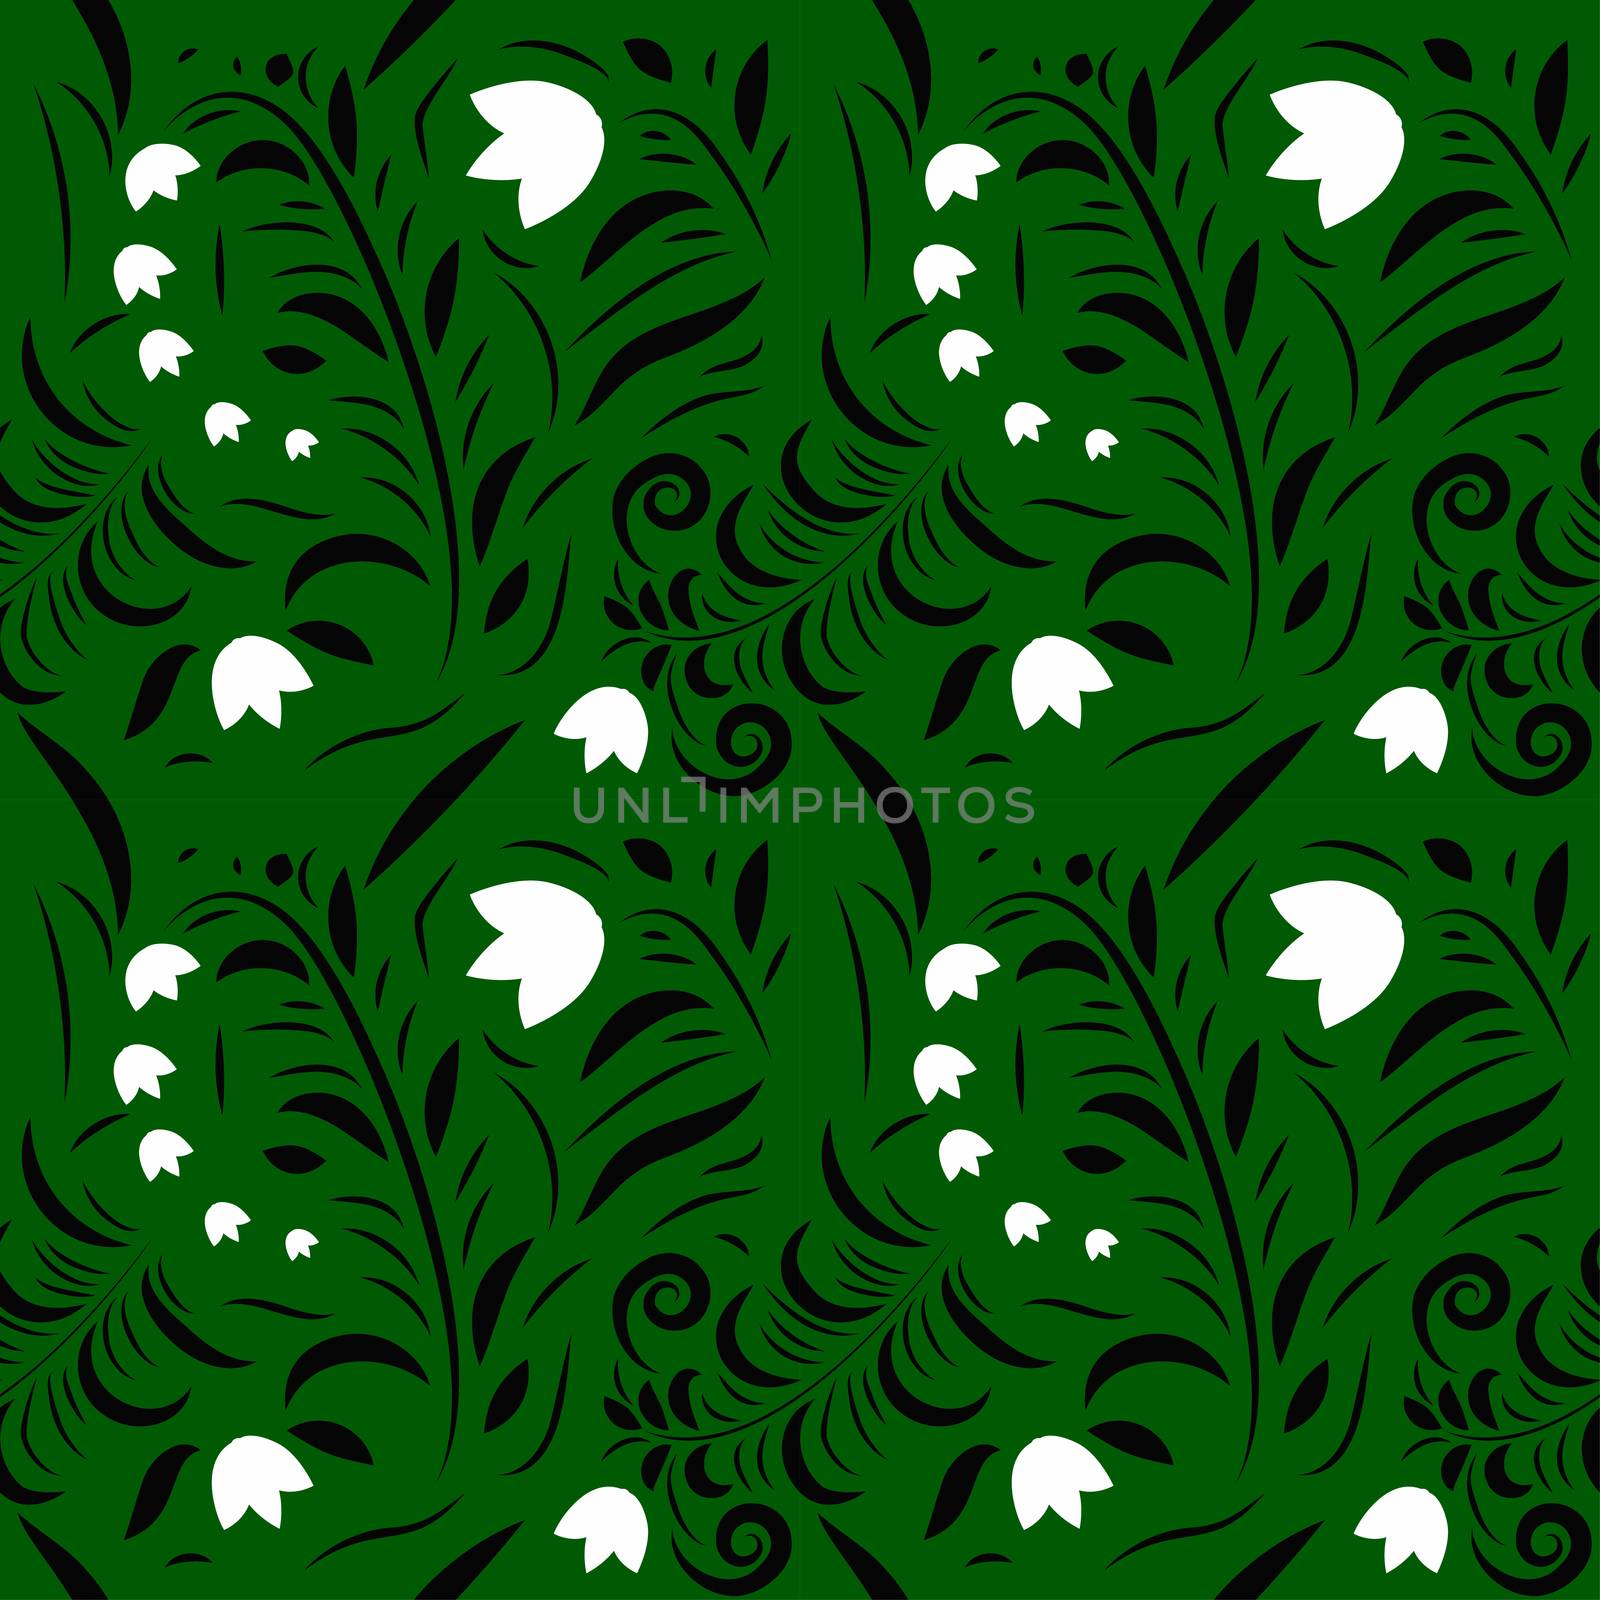 Floral pattern with flowers and leaves by eskimos